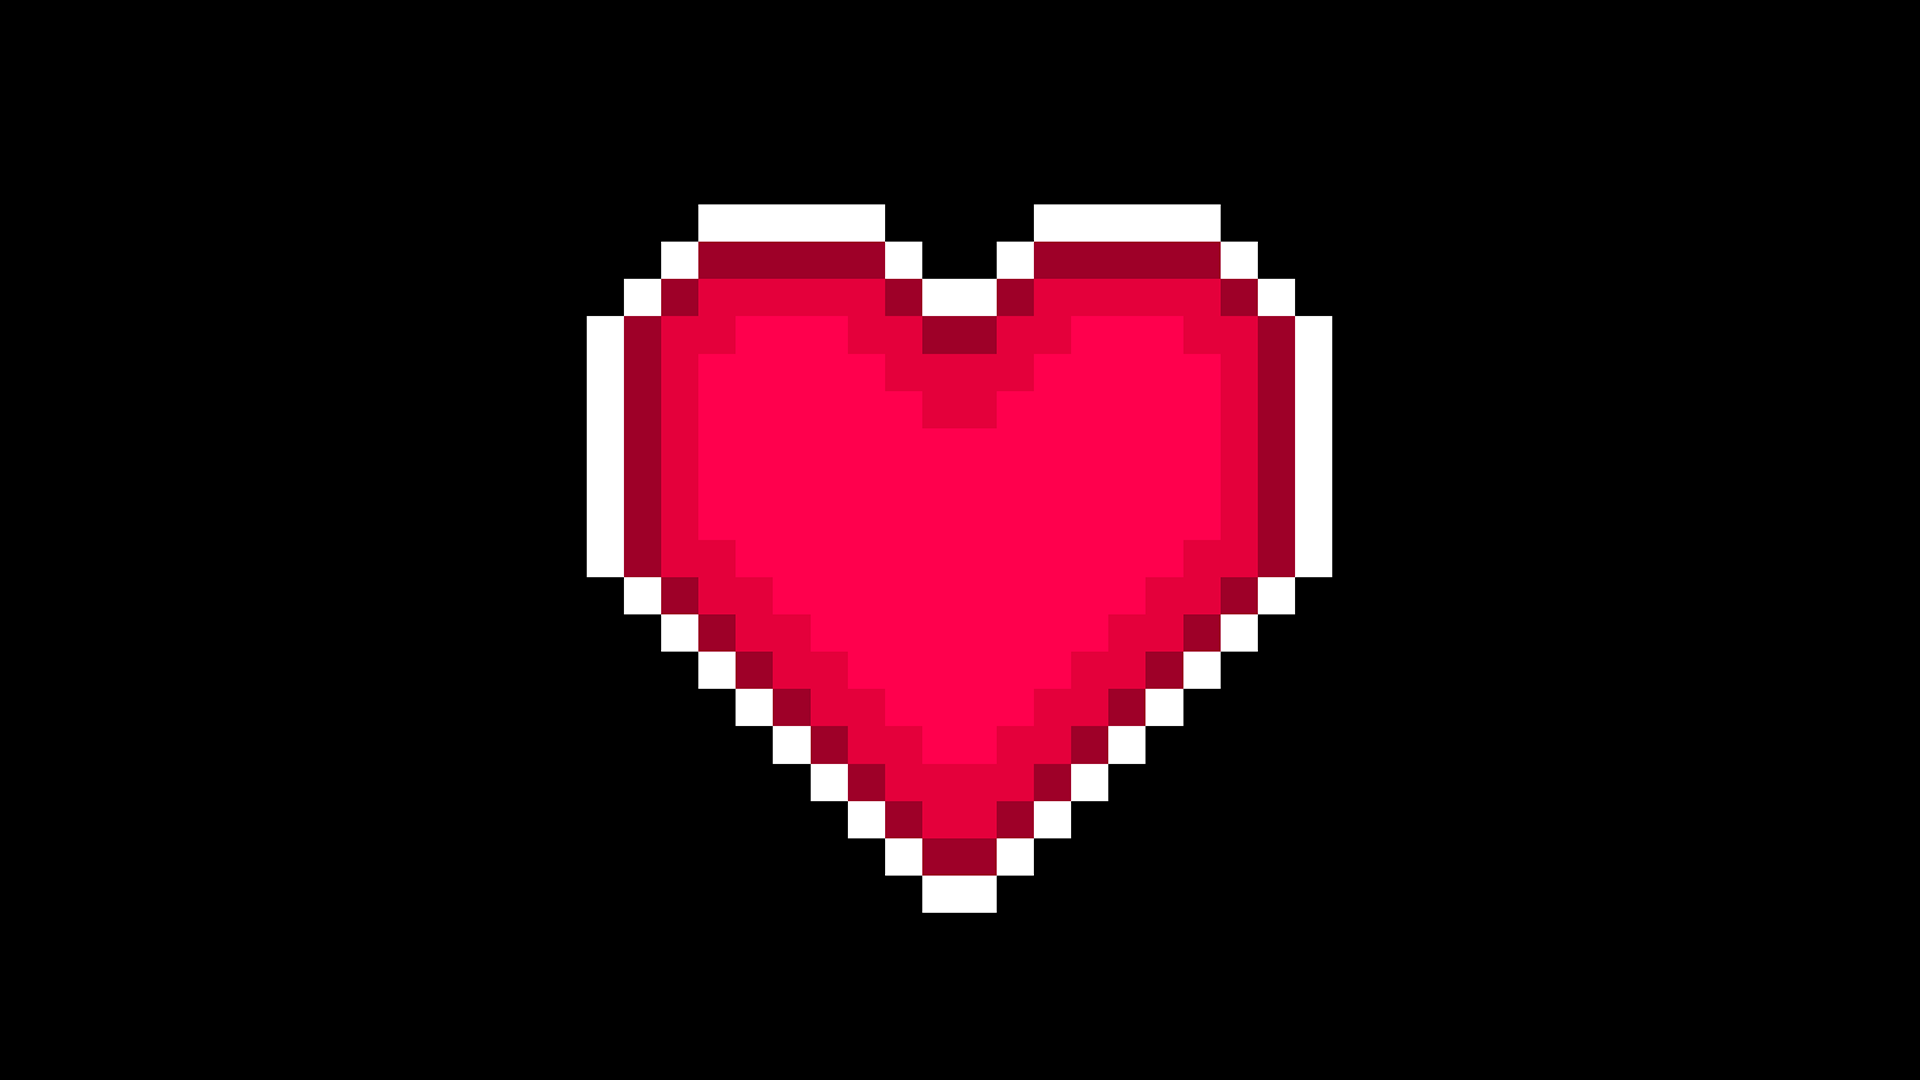 Icon for Heart